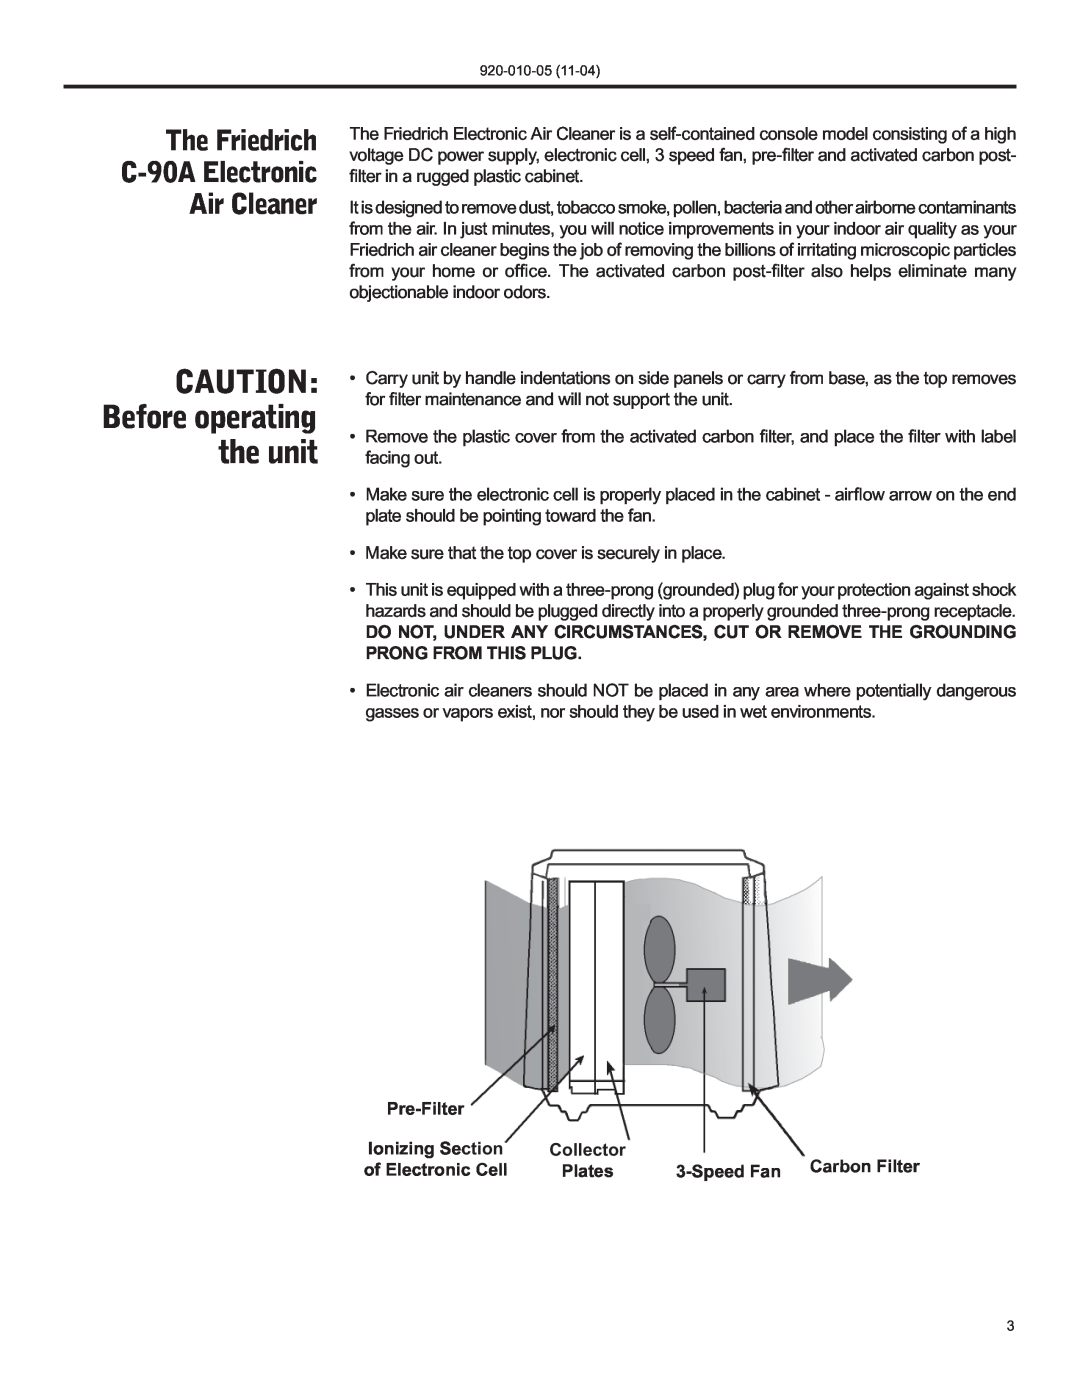 Nilfisk-ALTO manual The Friedrich C-90AElectronic Air Cleaner, CAUTION Before operating the unit, Pre-Filter, Collector 